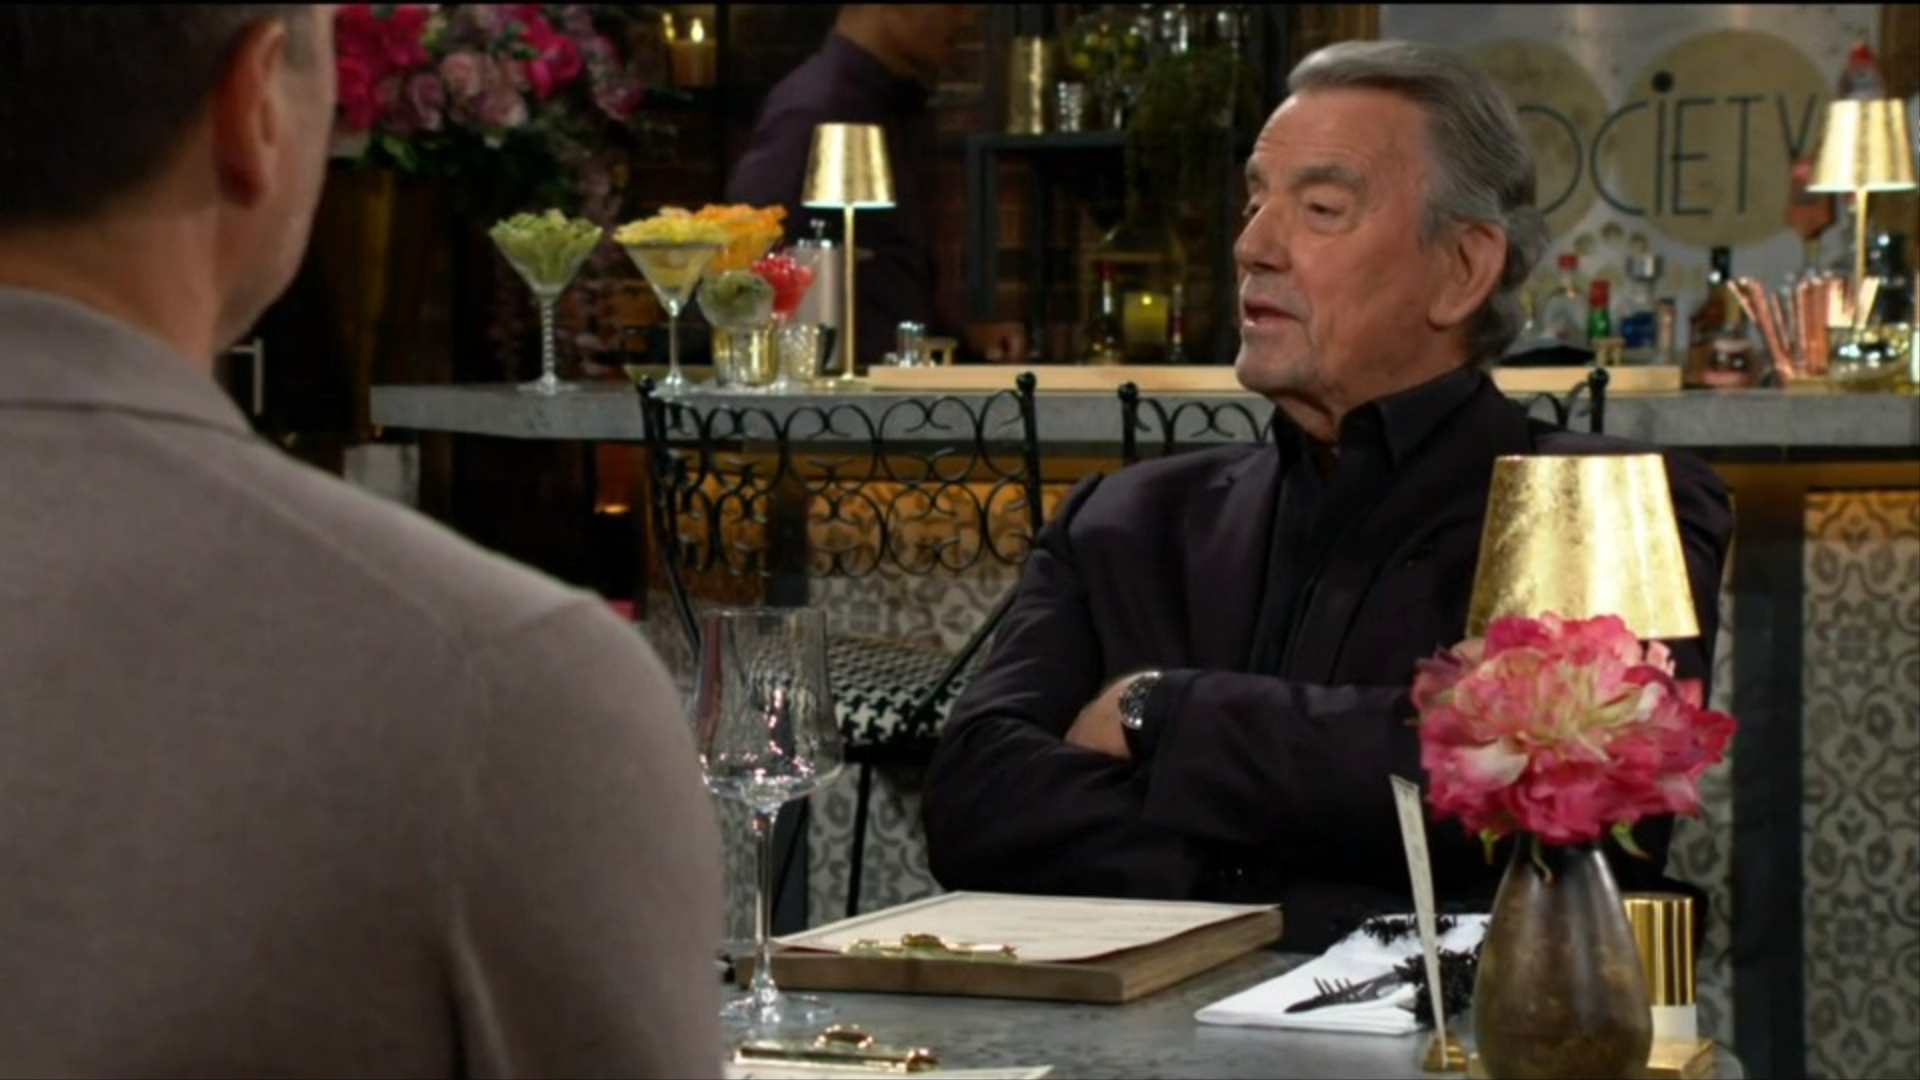 victor asks after faith Y&R